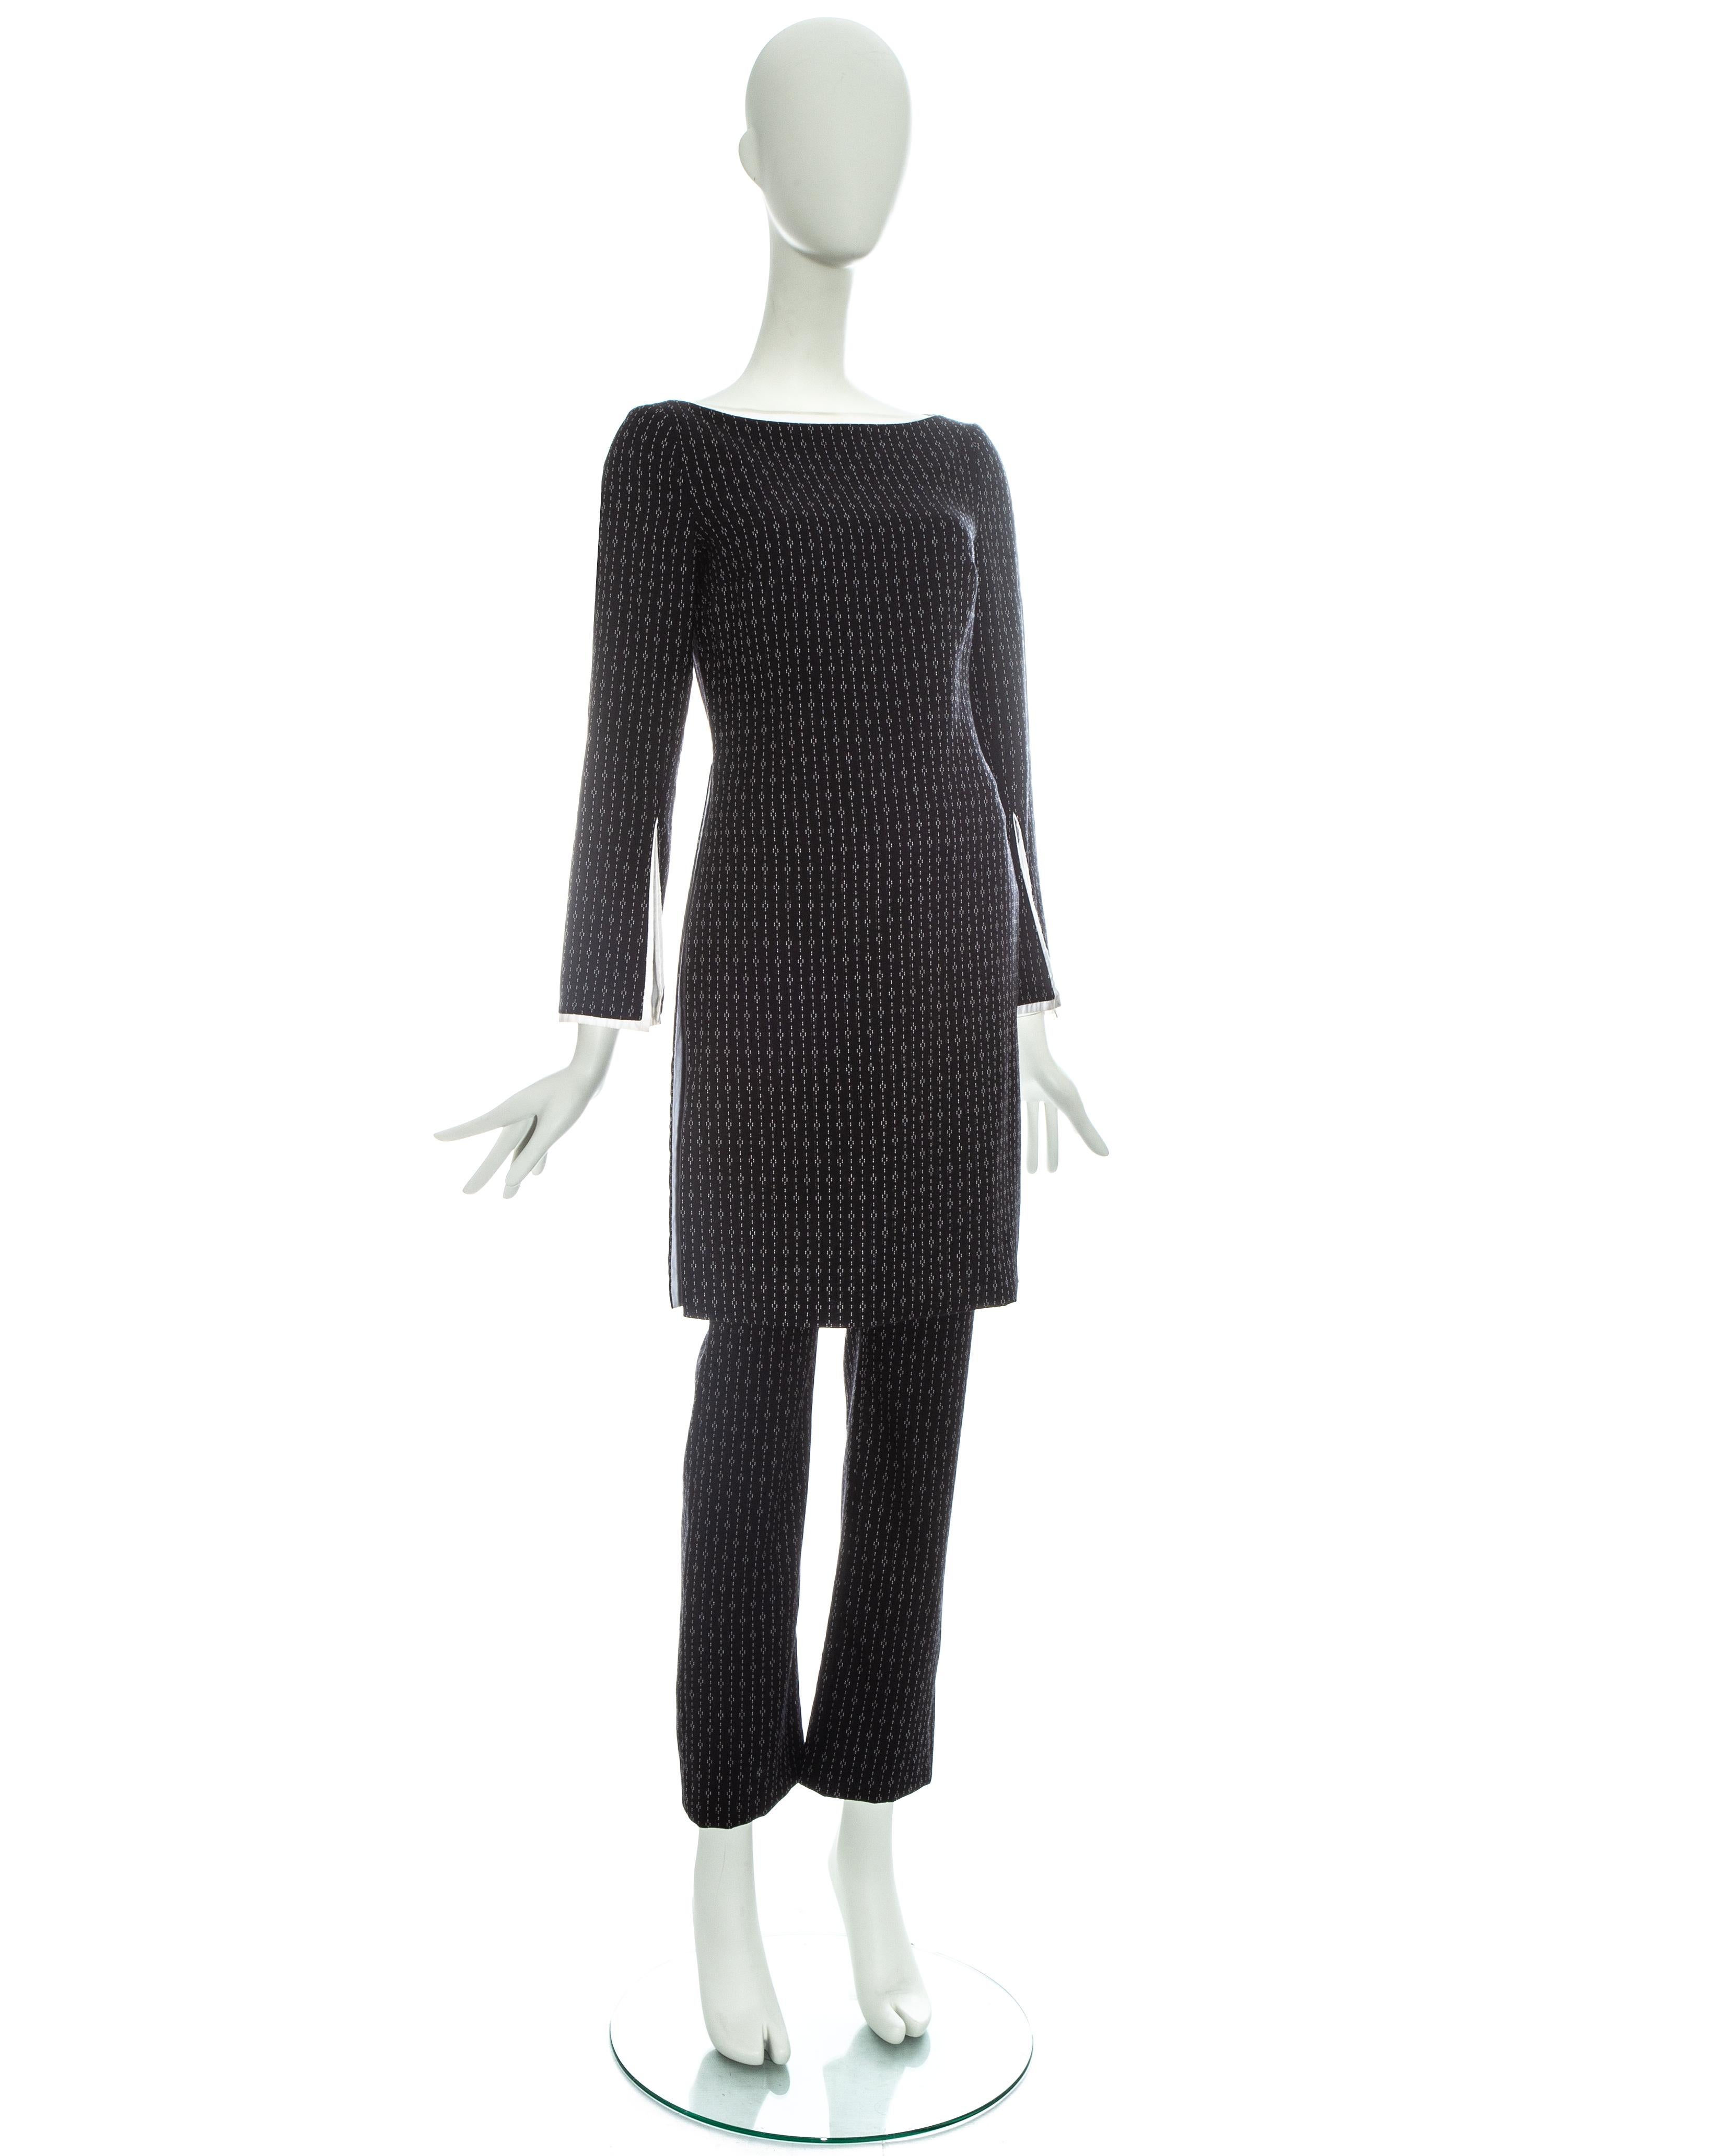 Gianni Versace black striped jacquard wool tunic and pants set. 

Mid length tunic with high slits on side seams and sleeves. High rise slim fit pants.

Fall-Winter 1999